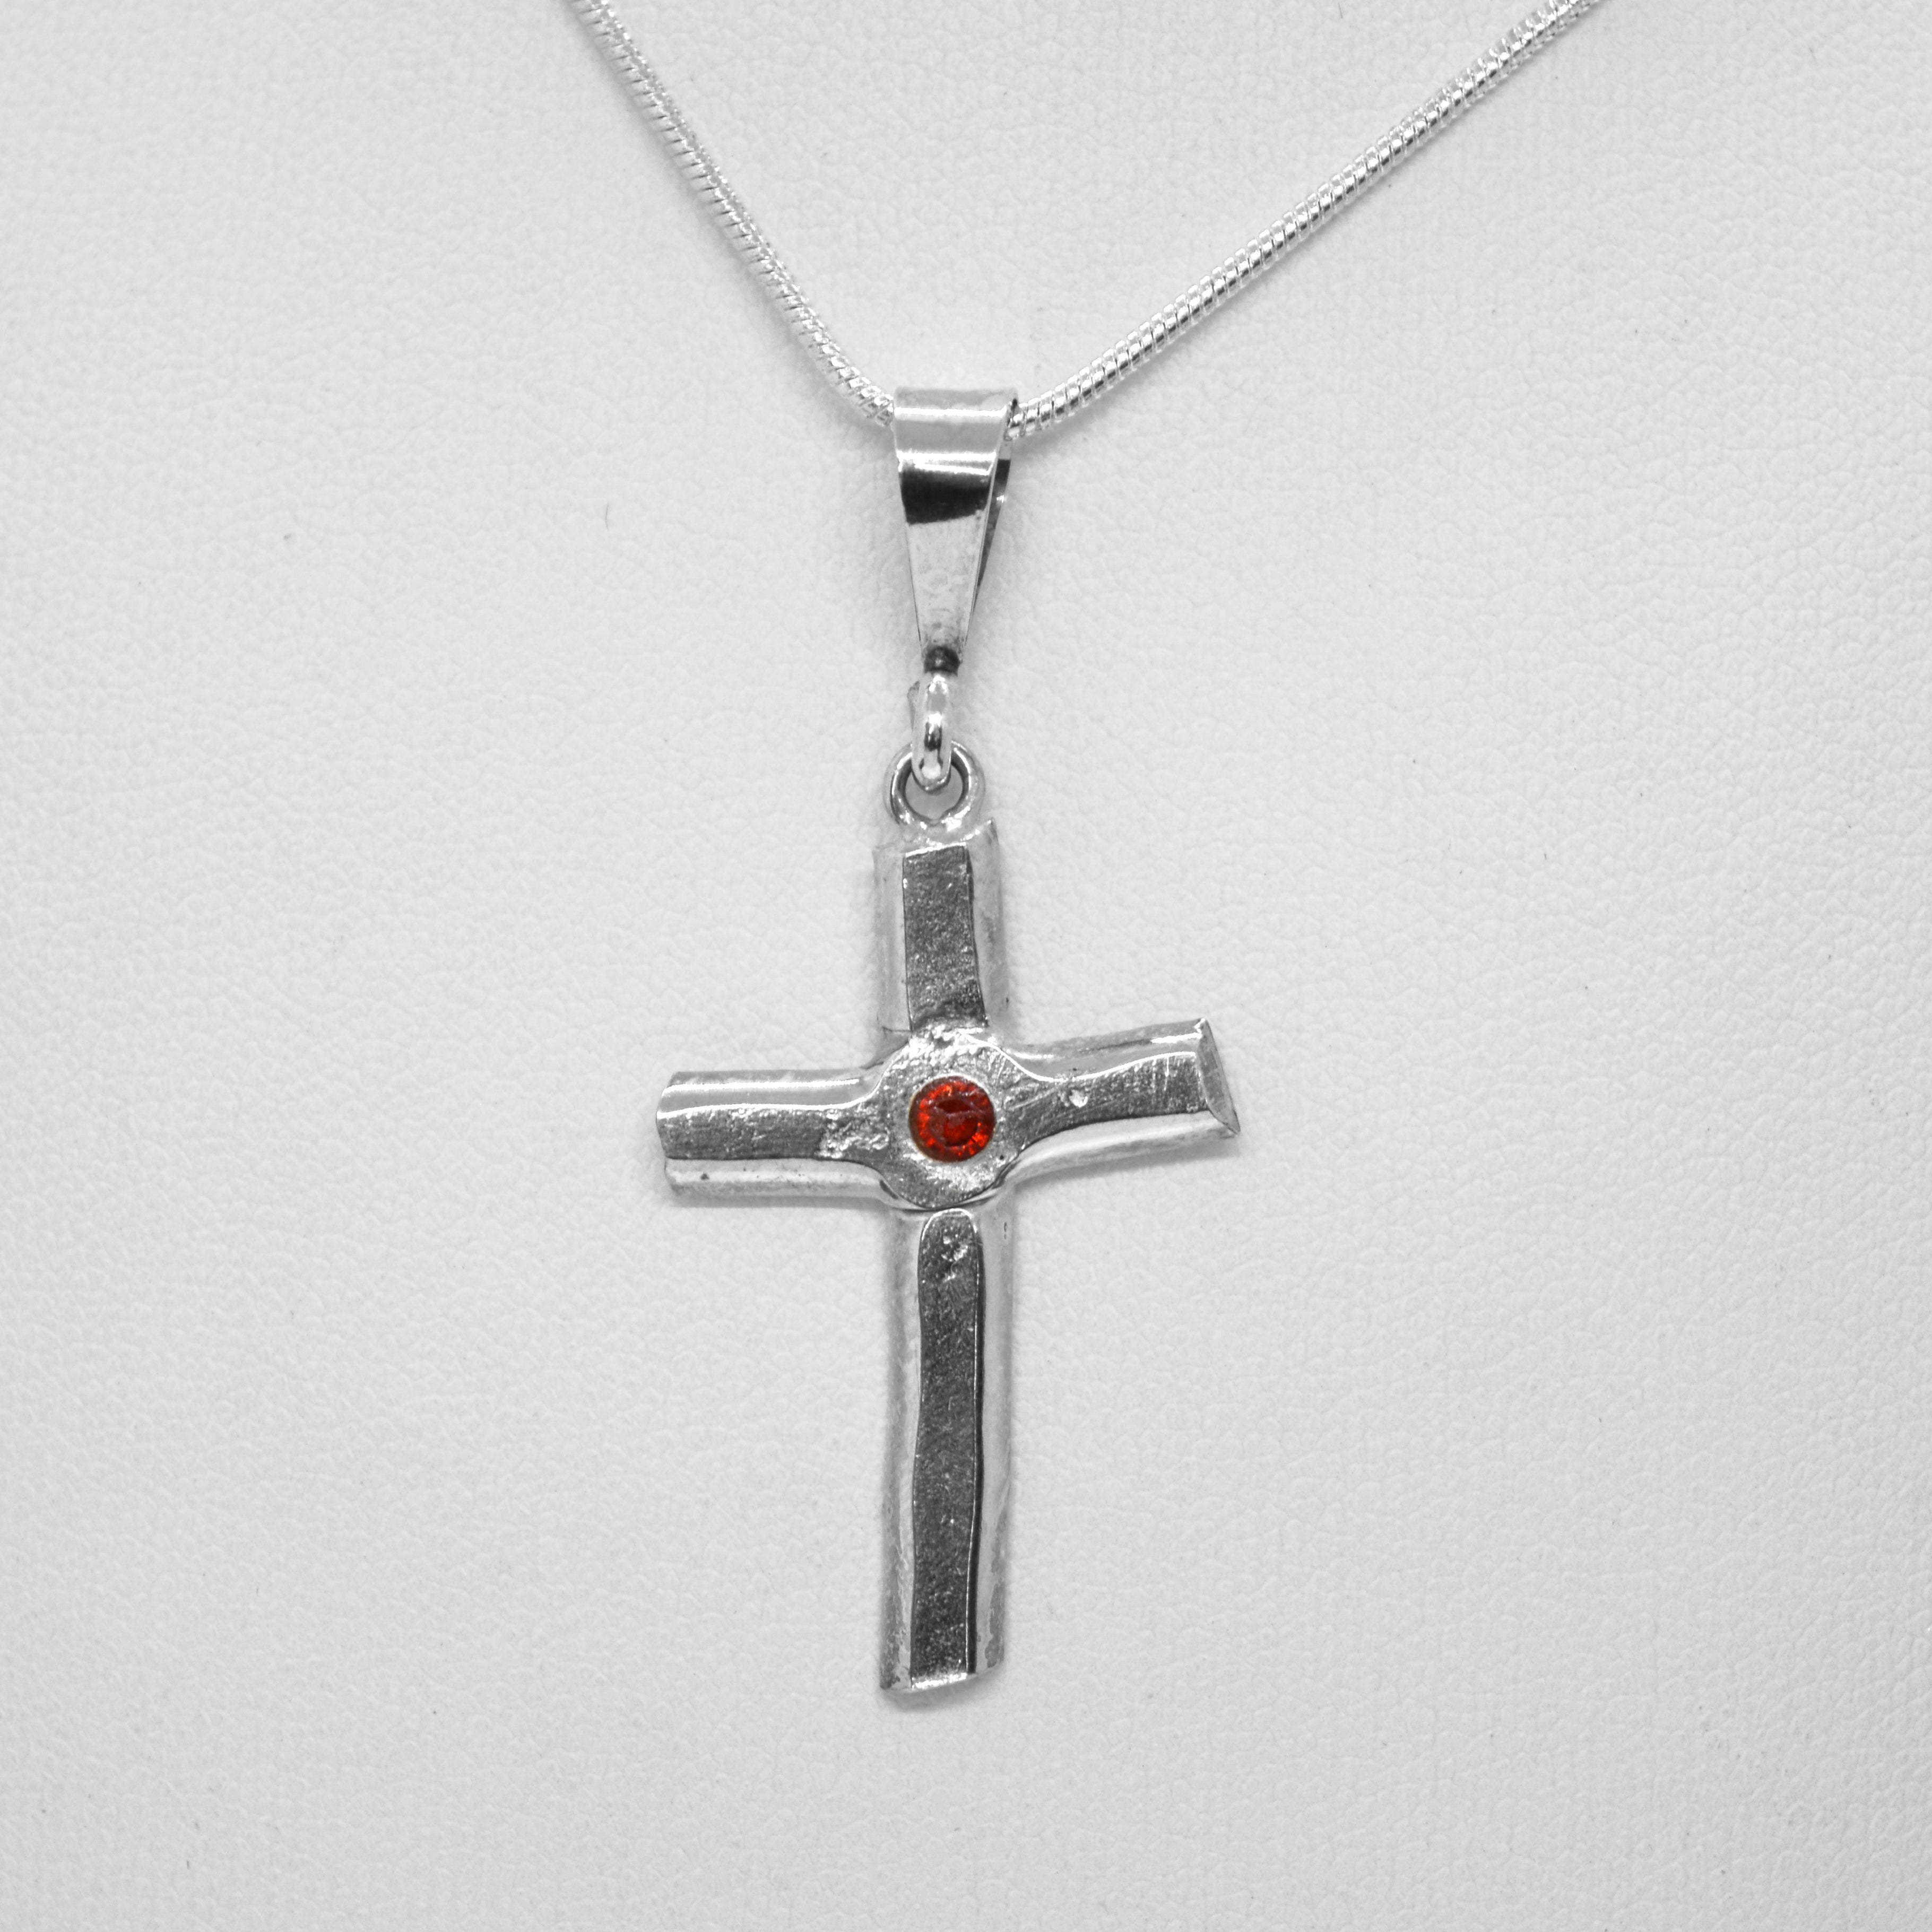 Cross with set in gemstone